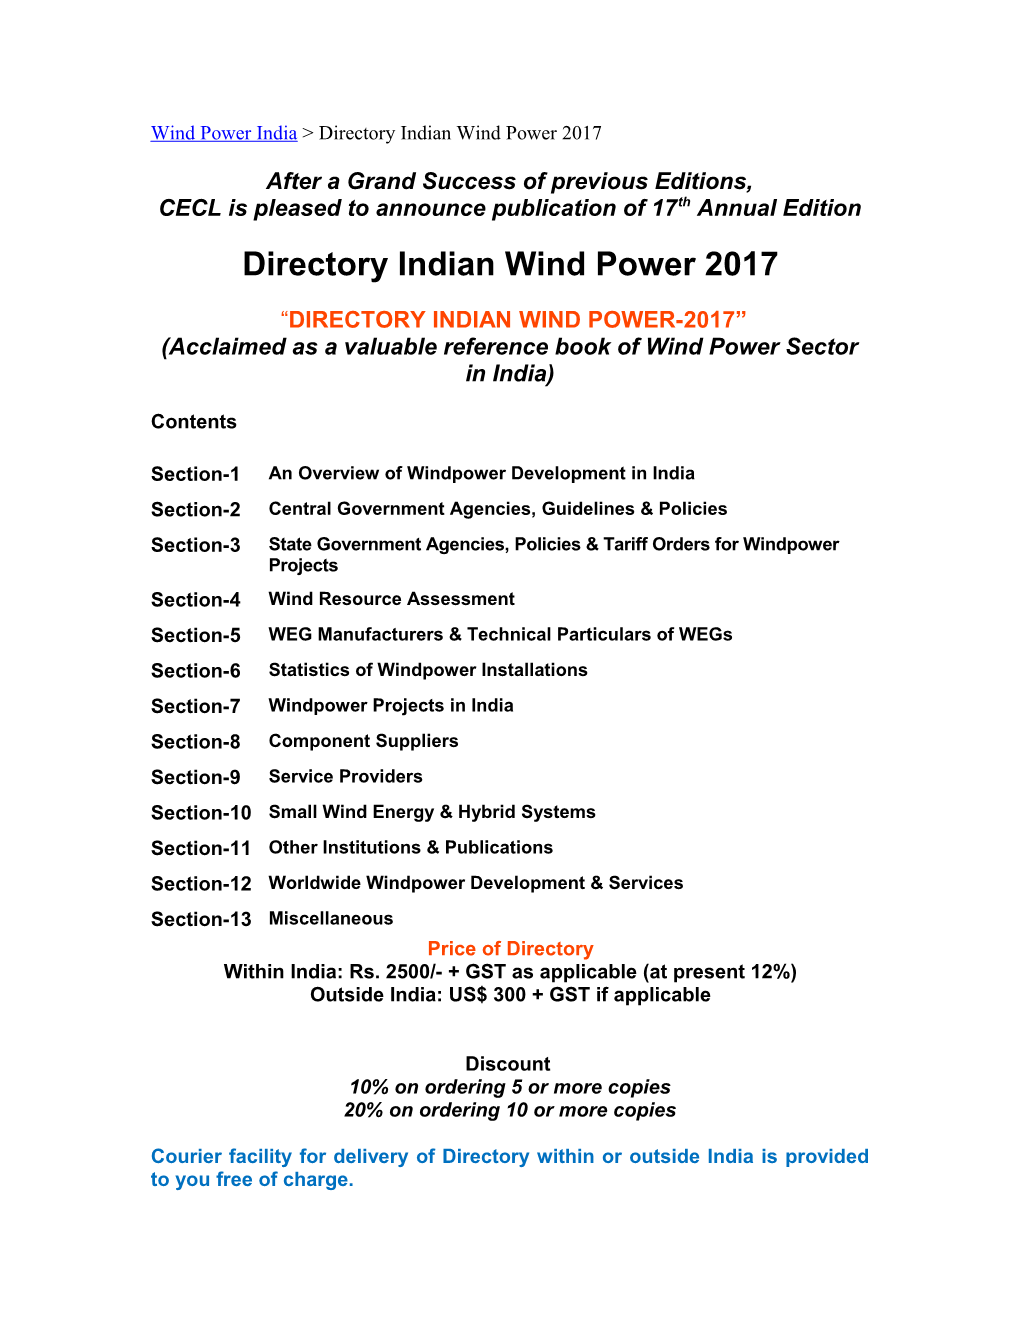 Wind Power India Directory Indian Wind Power 2015